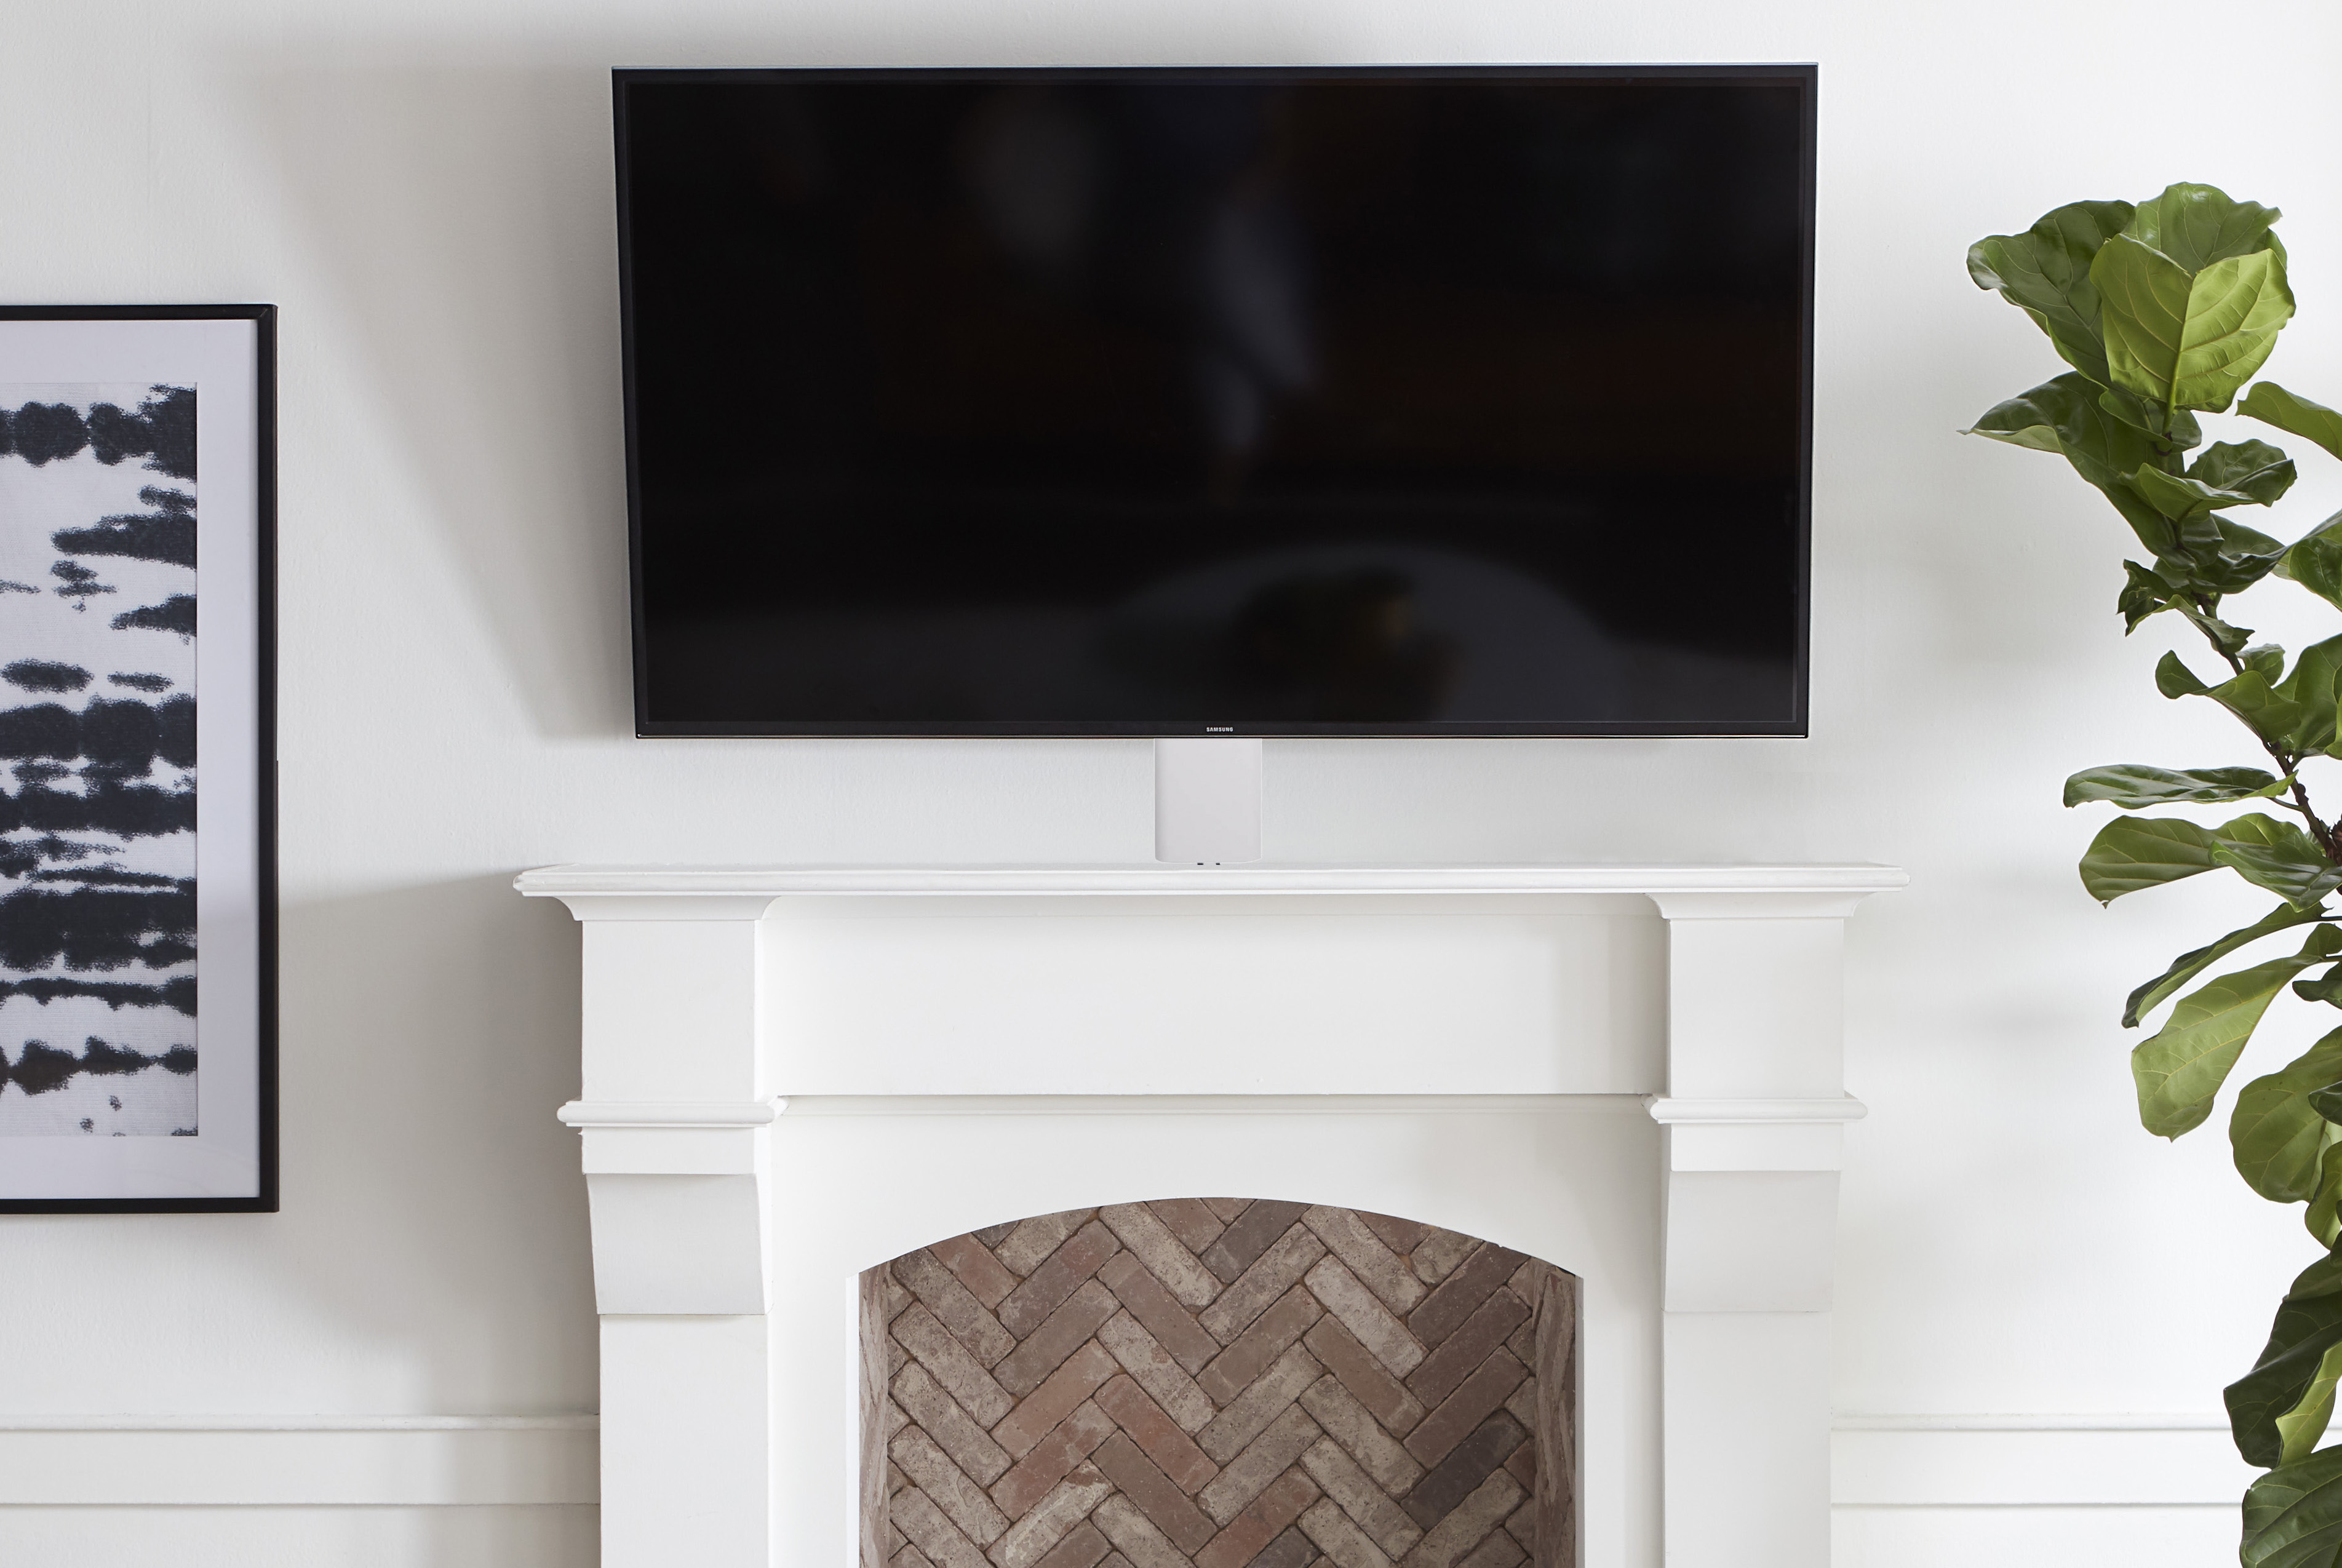 Mounting A Tv Over Fireplace How, How To Hang A Tv Above Fireplace